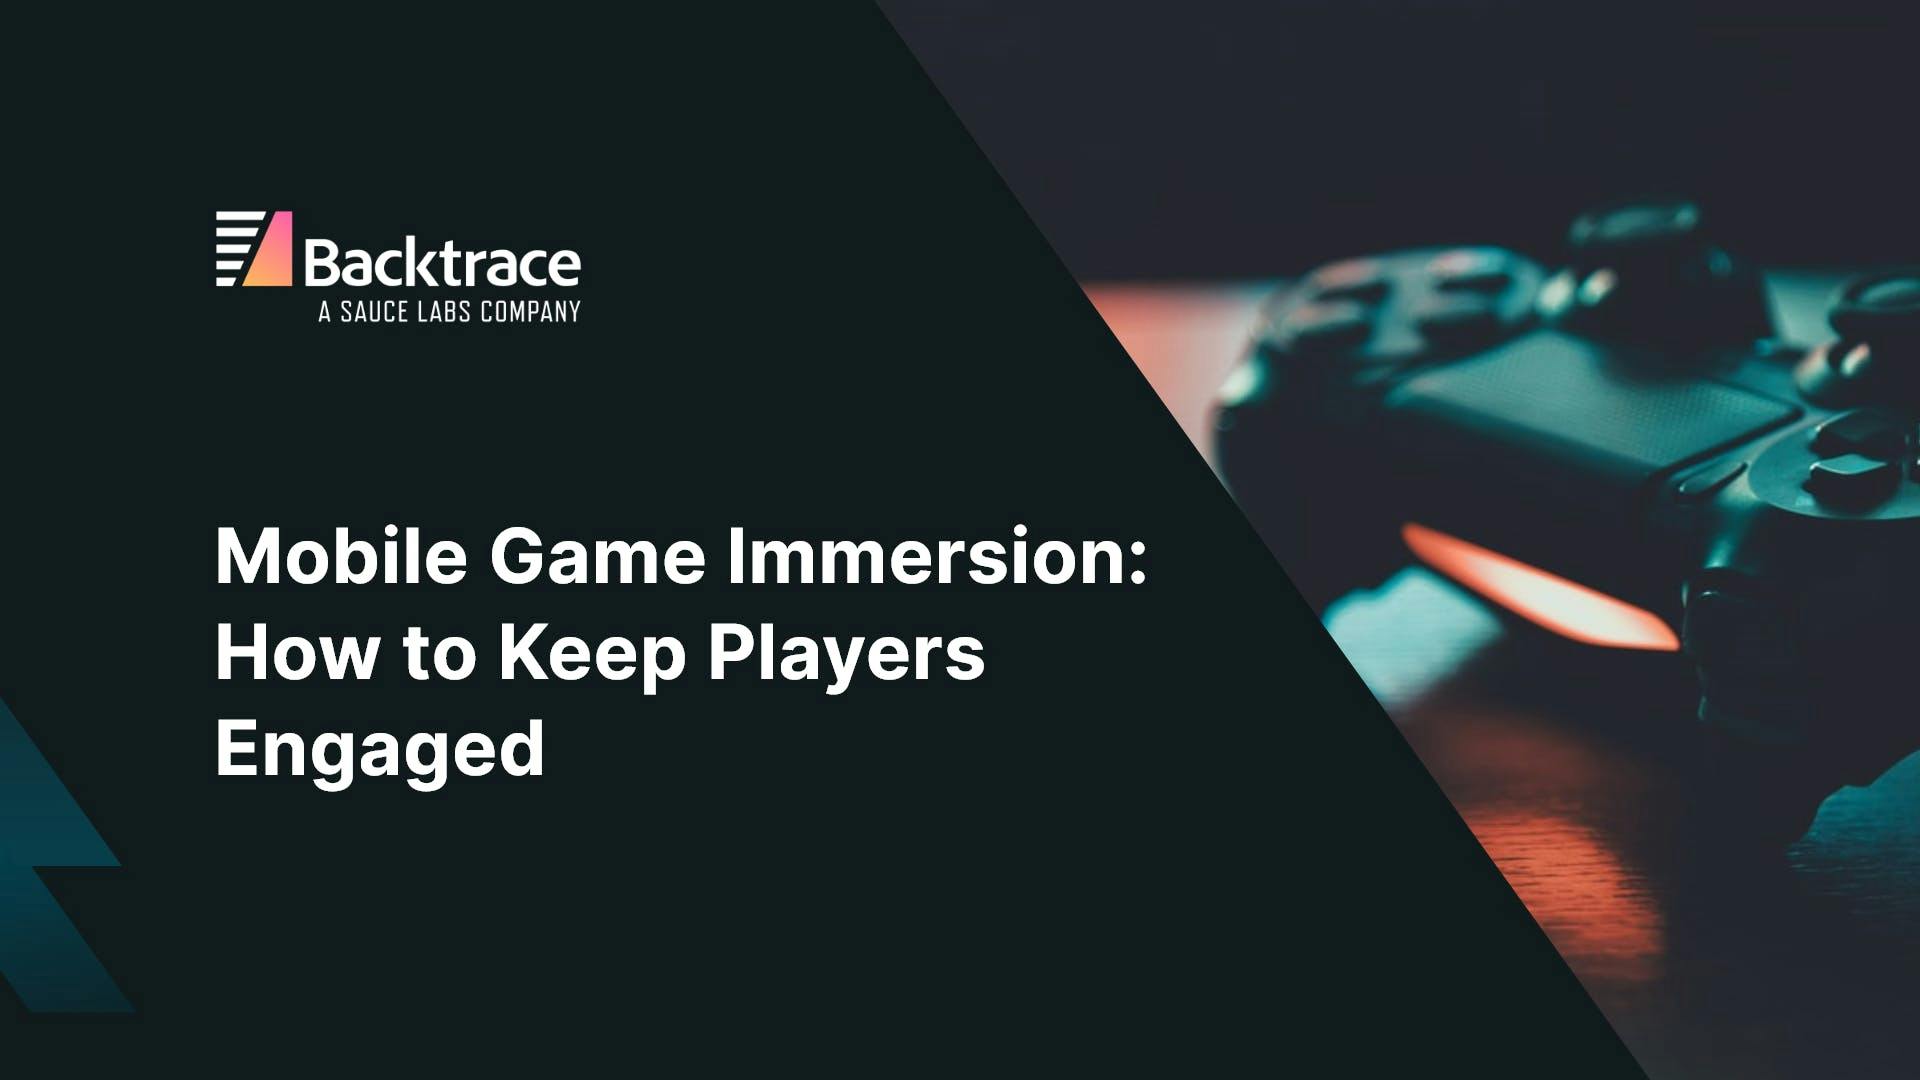 Mobile Game Immersion: How to Keep Players Engaged